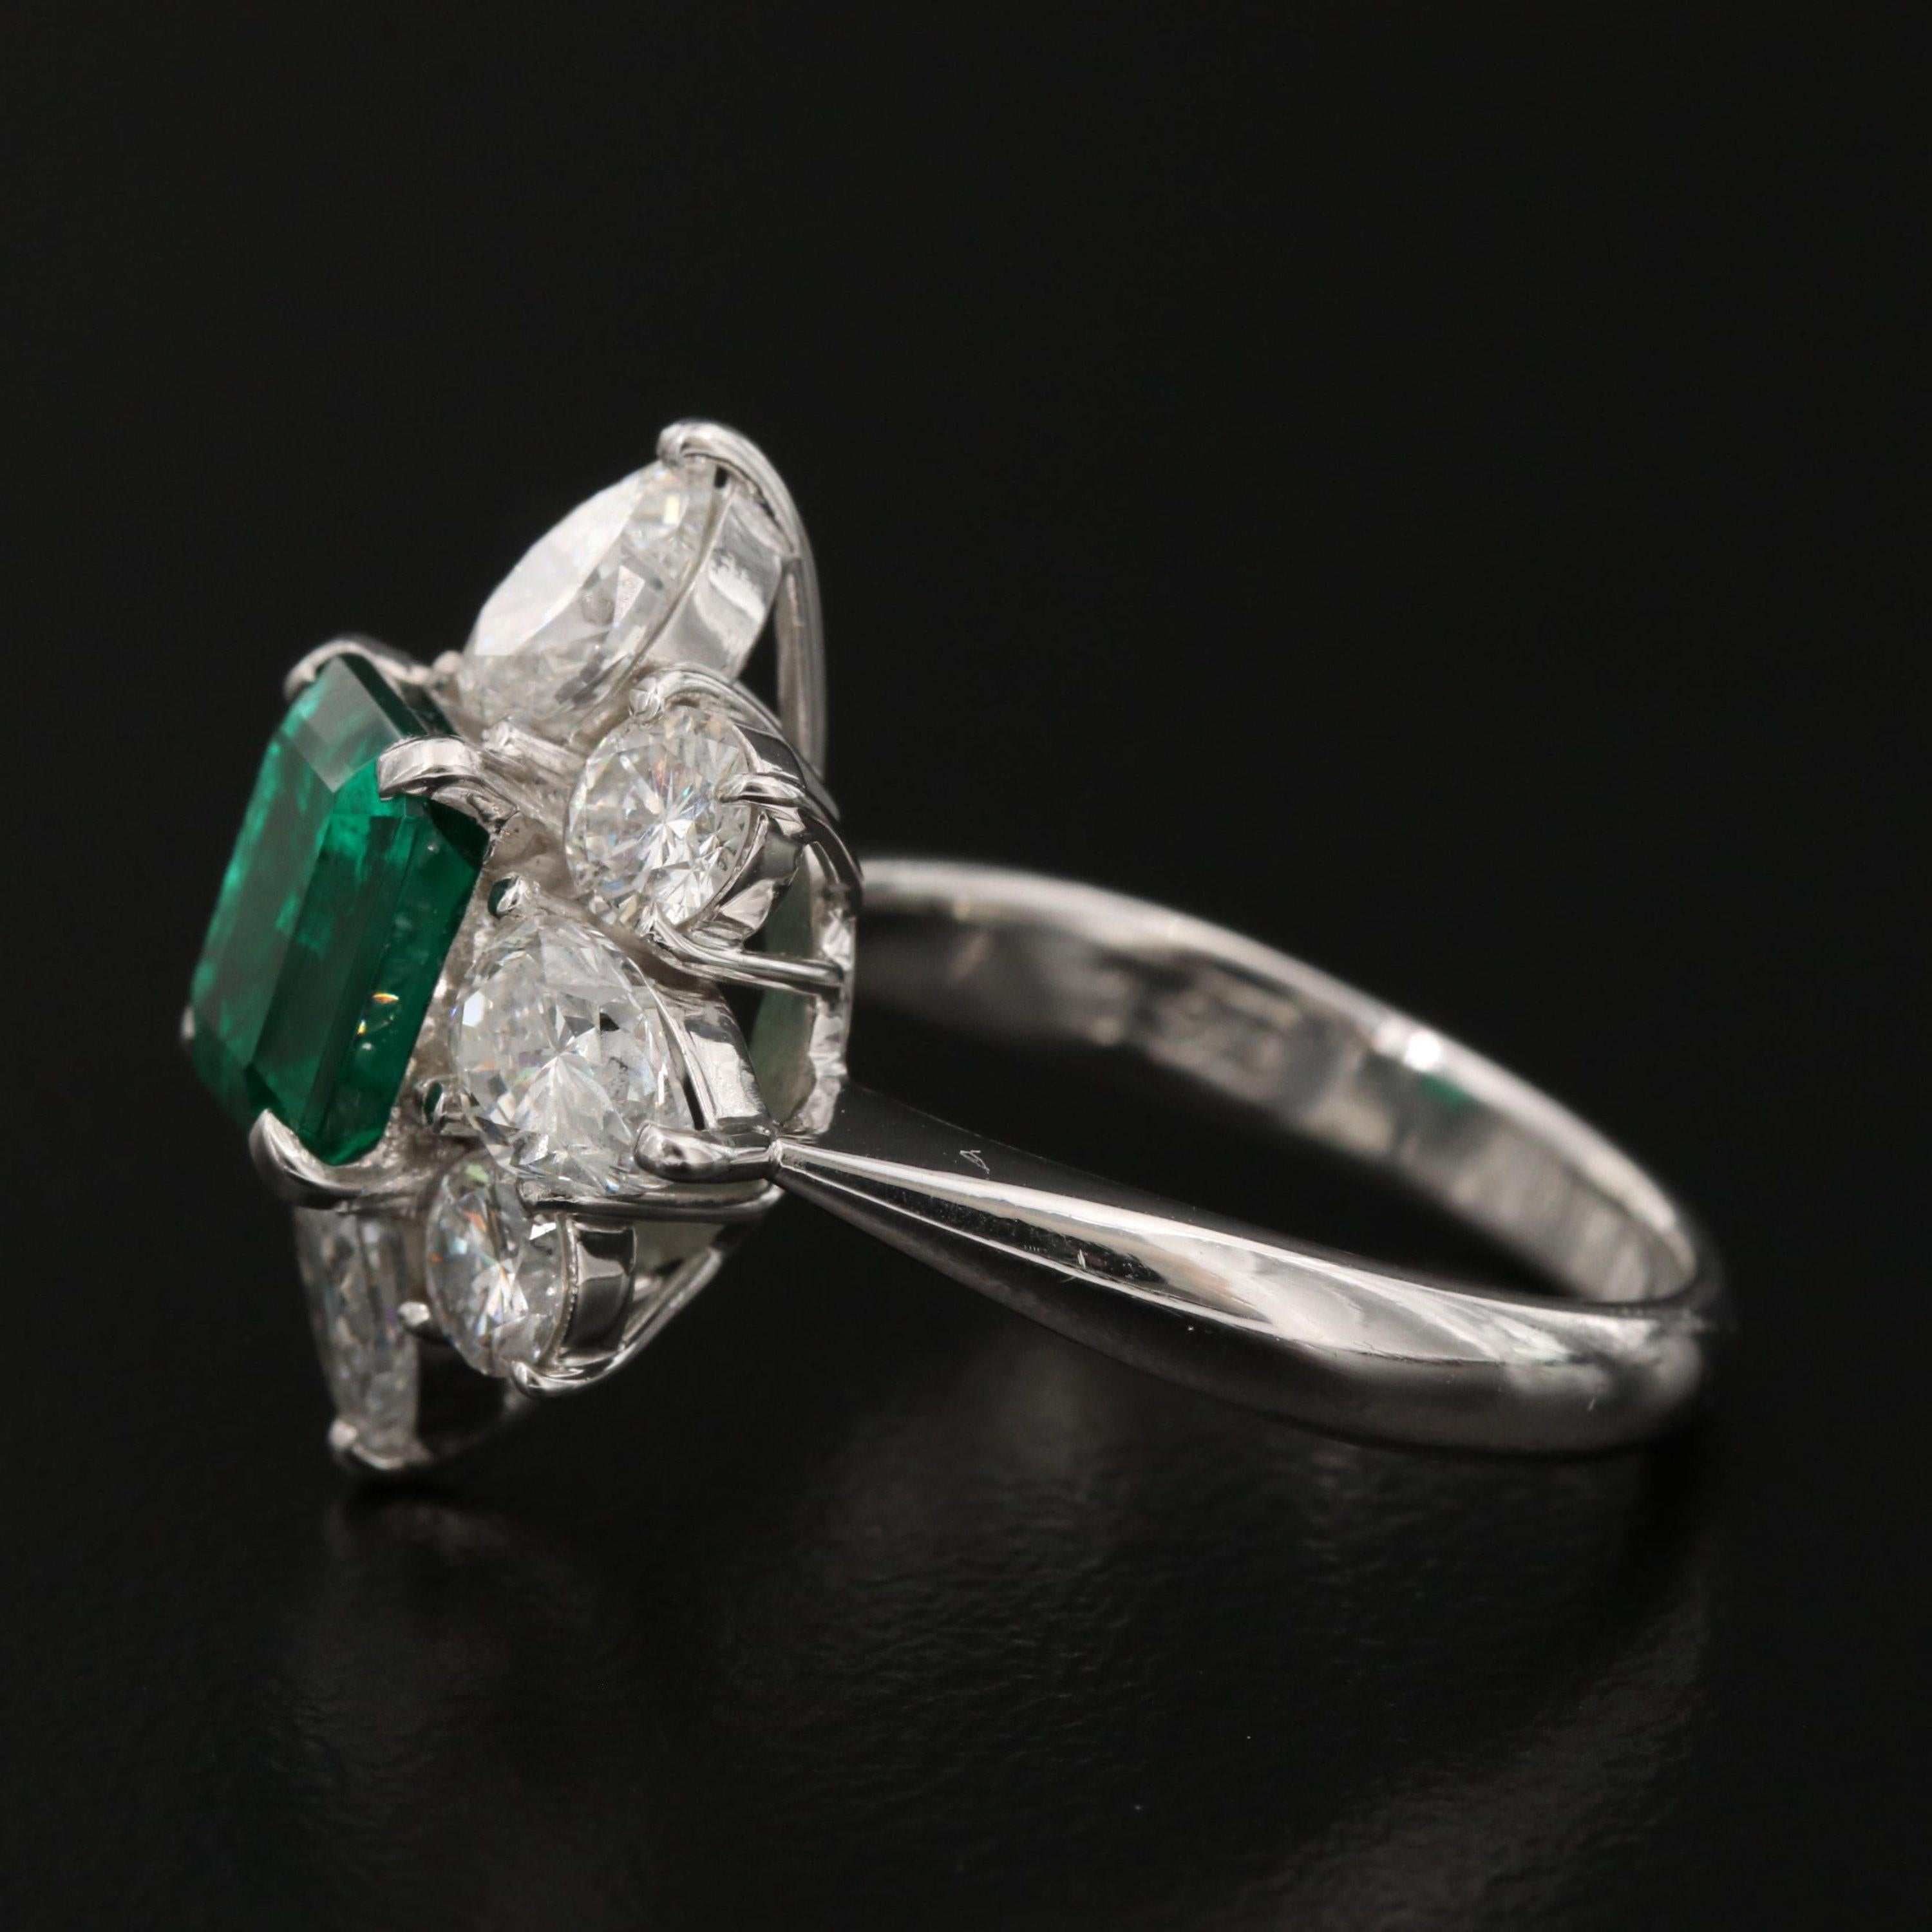 For Sale:  1.9 Carat Floral Emerald and Diamond Engagement Ring, White Gold Cocktail Ring 5